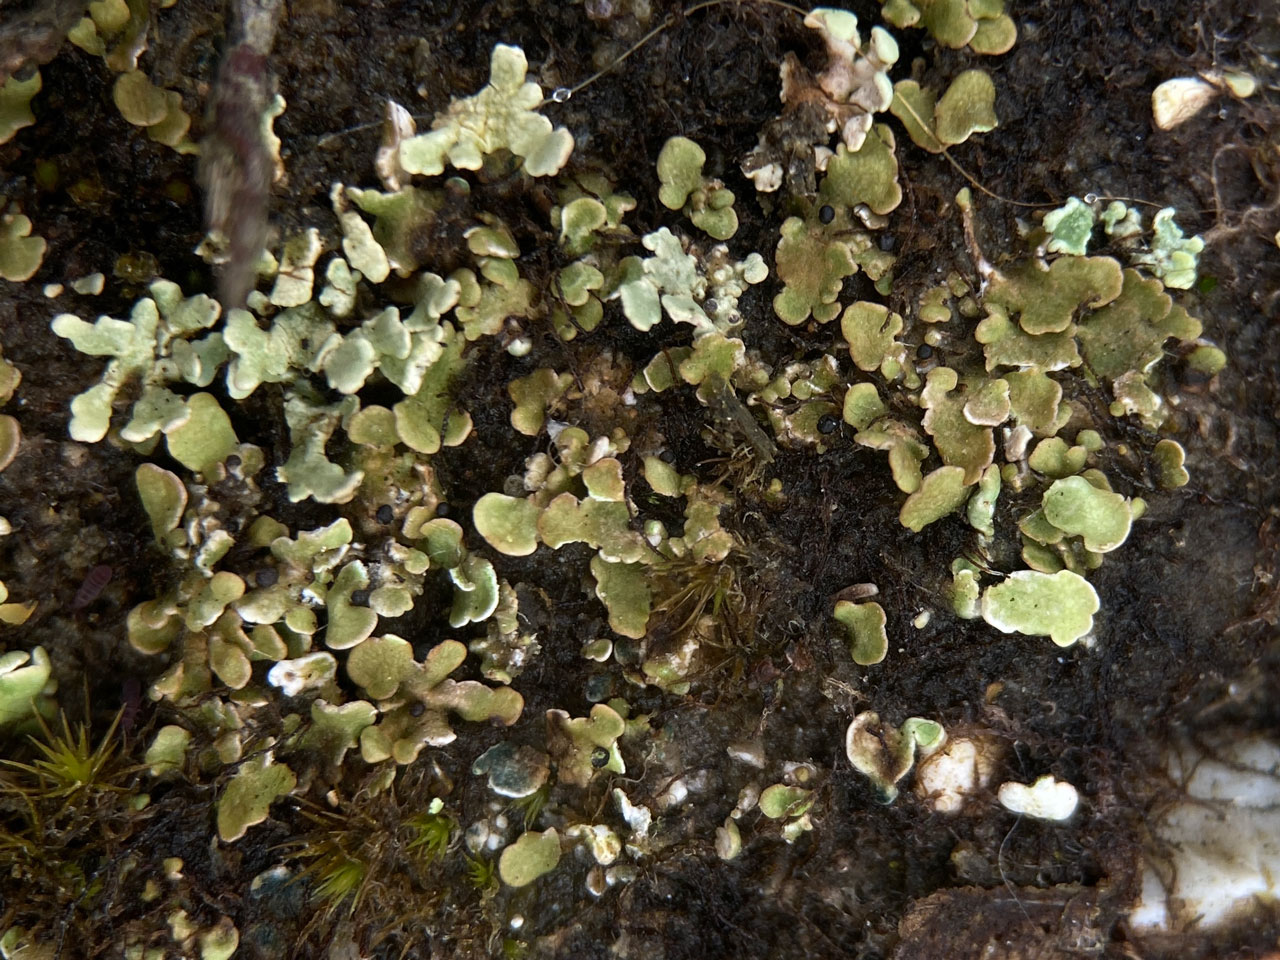 Cladonia brevis, Fritham Plain, New Forest